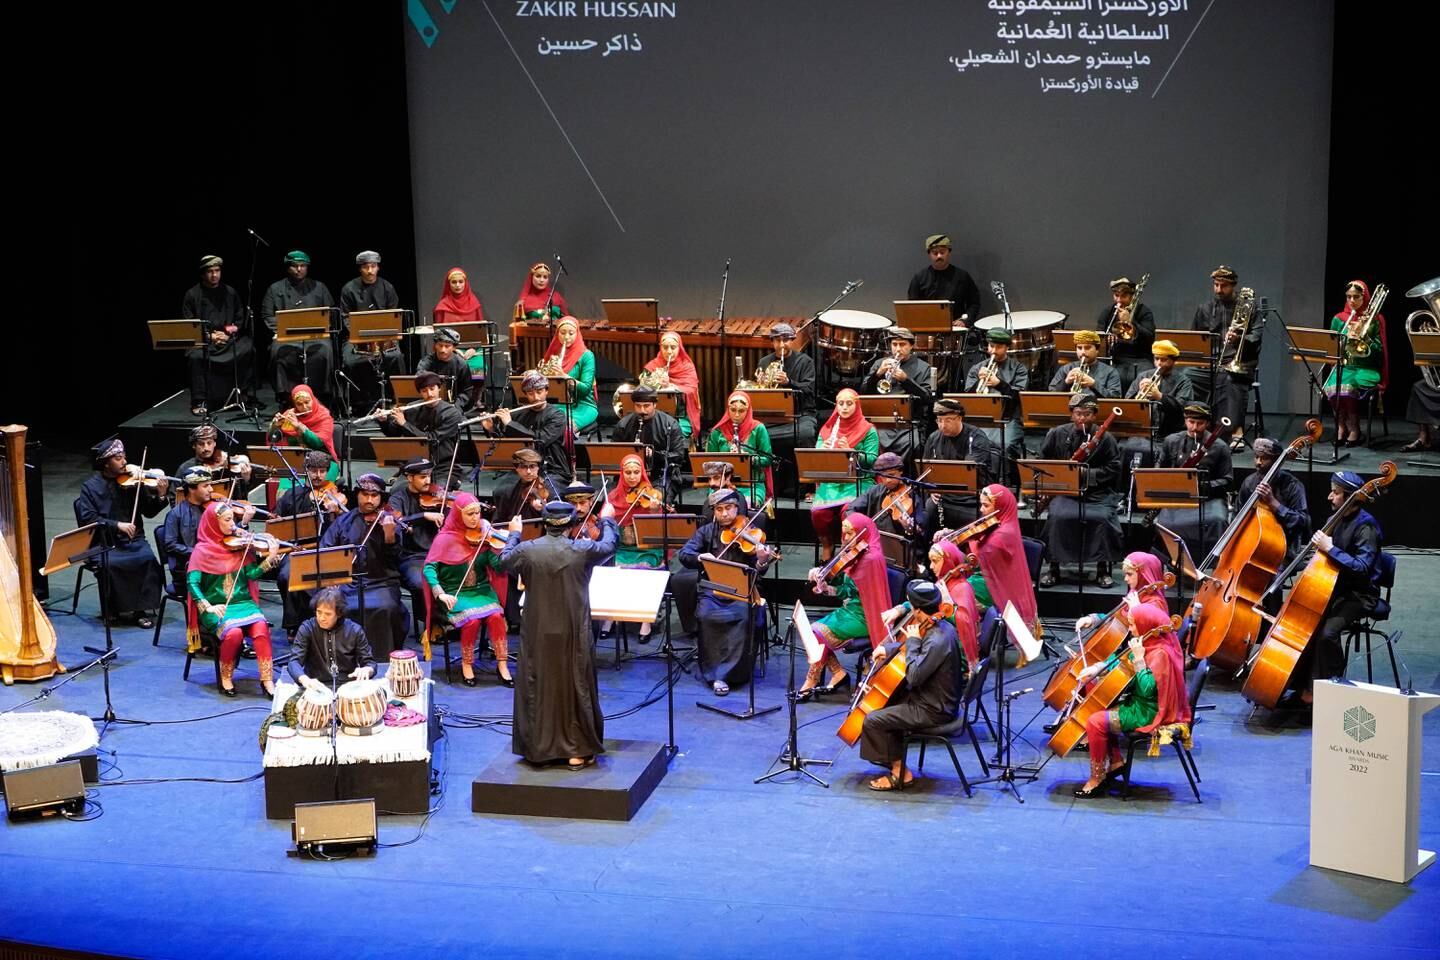 Zakir Hussain performing with the Royal Oman Symphony Orchestra at the 2022 Aga Khan Music Awards.  Photo: Aga Khan Music Awards